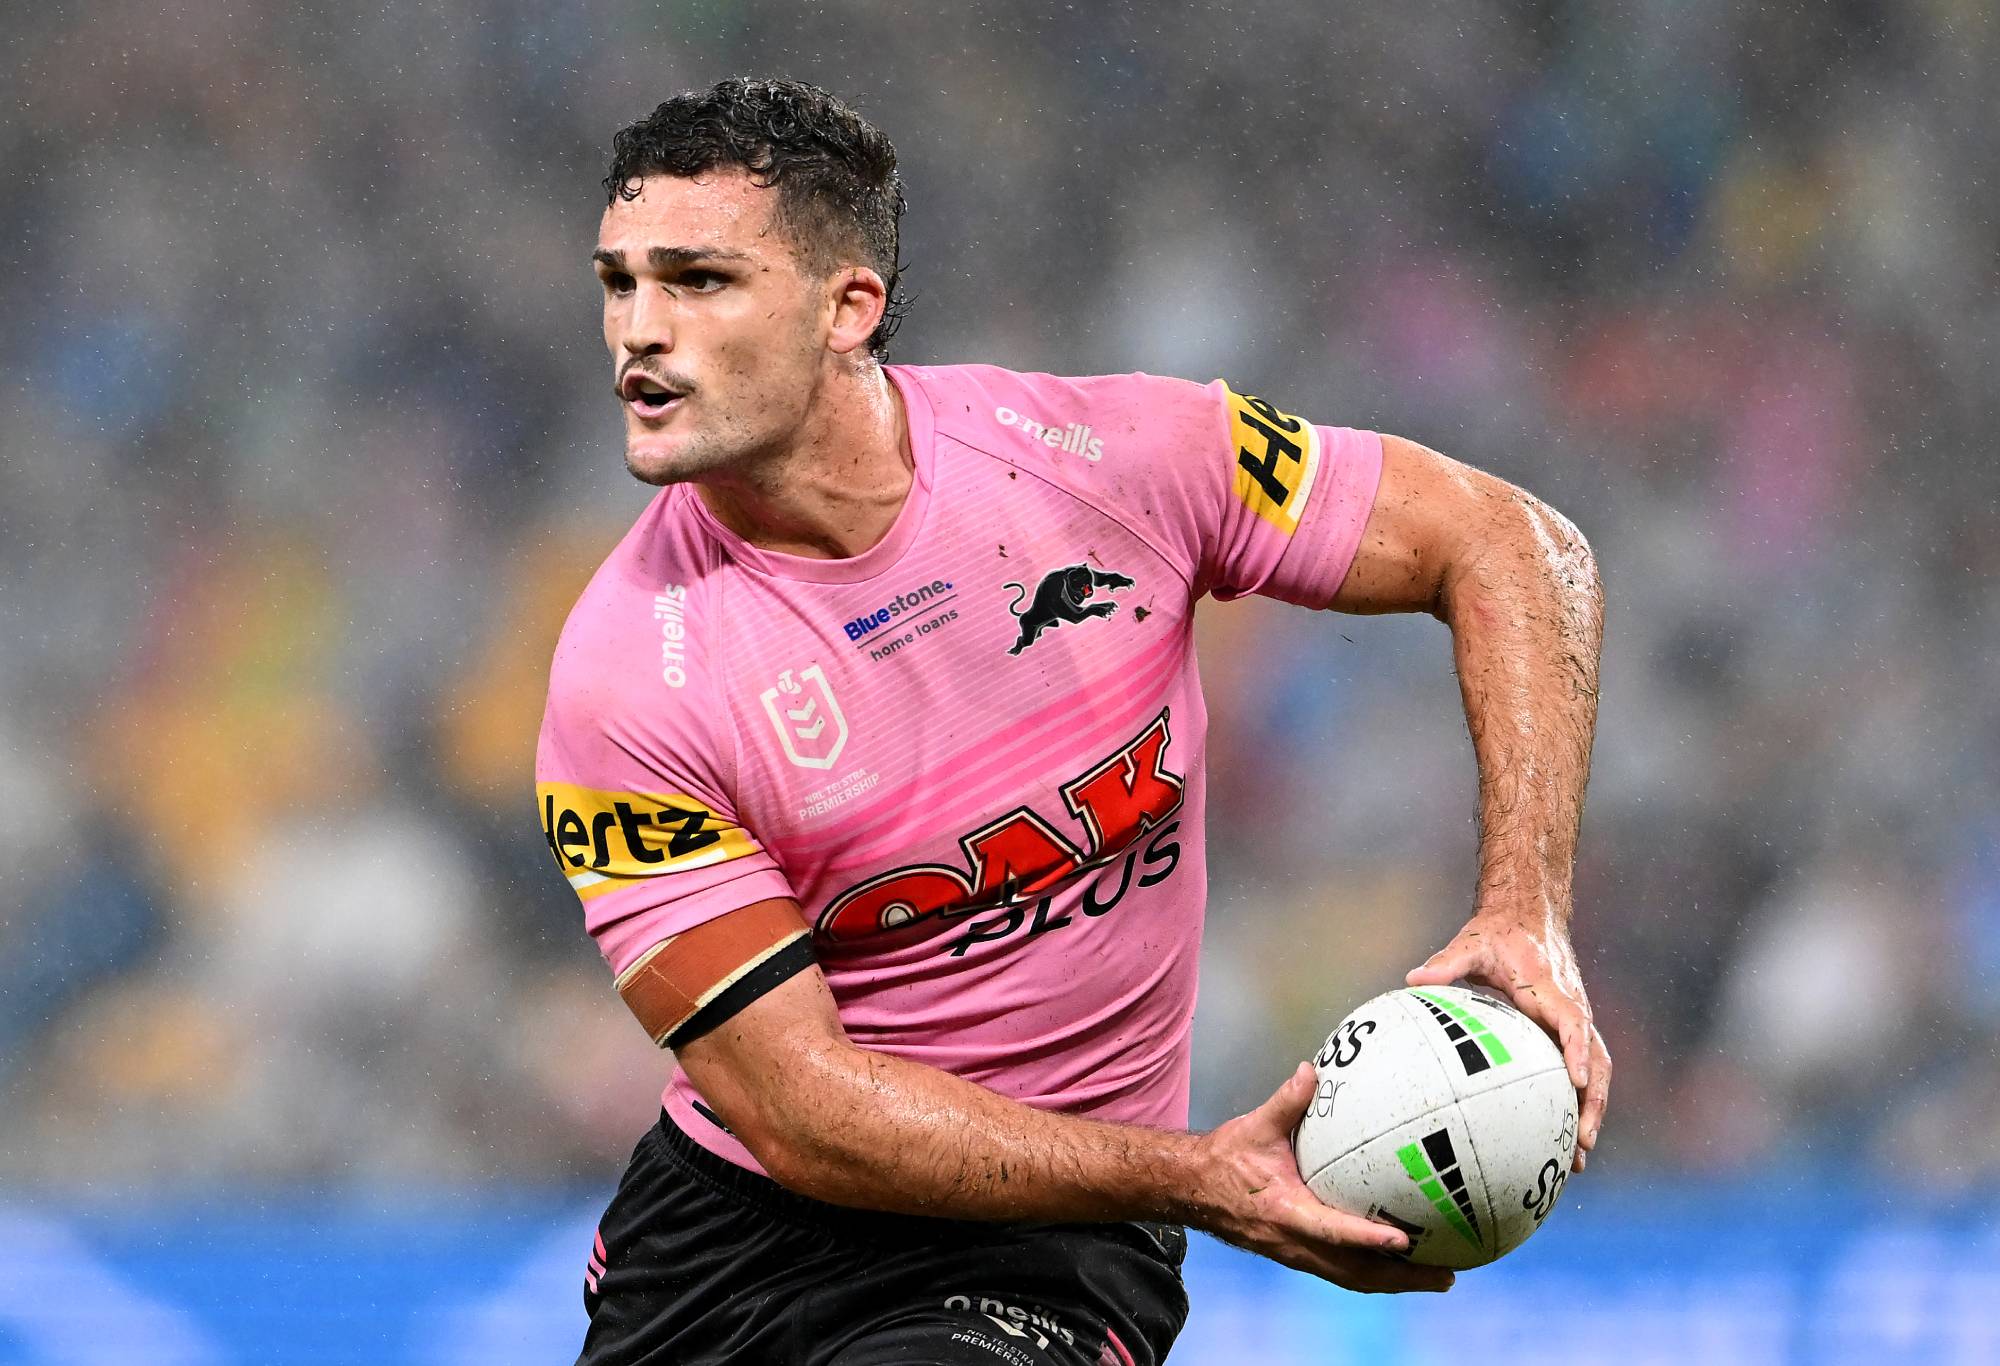 BRISBANE, AUSTRALIA - May 14: Panthers' Nathan Cleary looks to pass the ball during the NRL Round 10 match between Melbourne Storm and Penrith Panthers at Suncorp Stadium, on May 14, 2022, in Brisbane, Australia.  (Photo by Bradley Canaris/Getty Images)